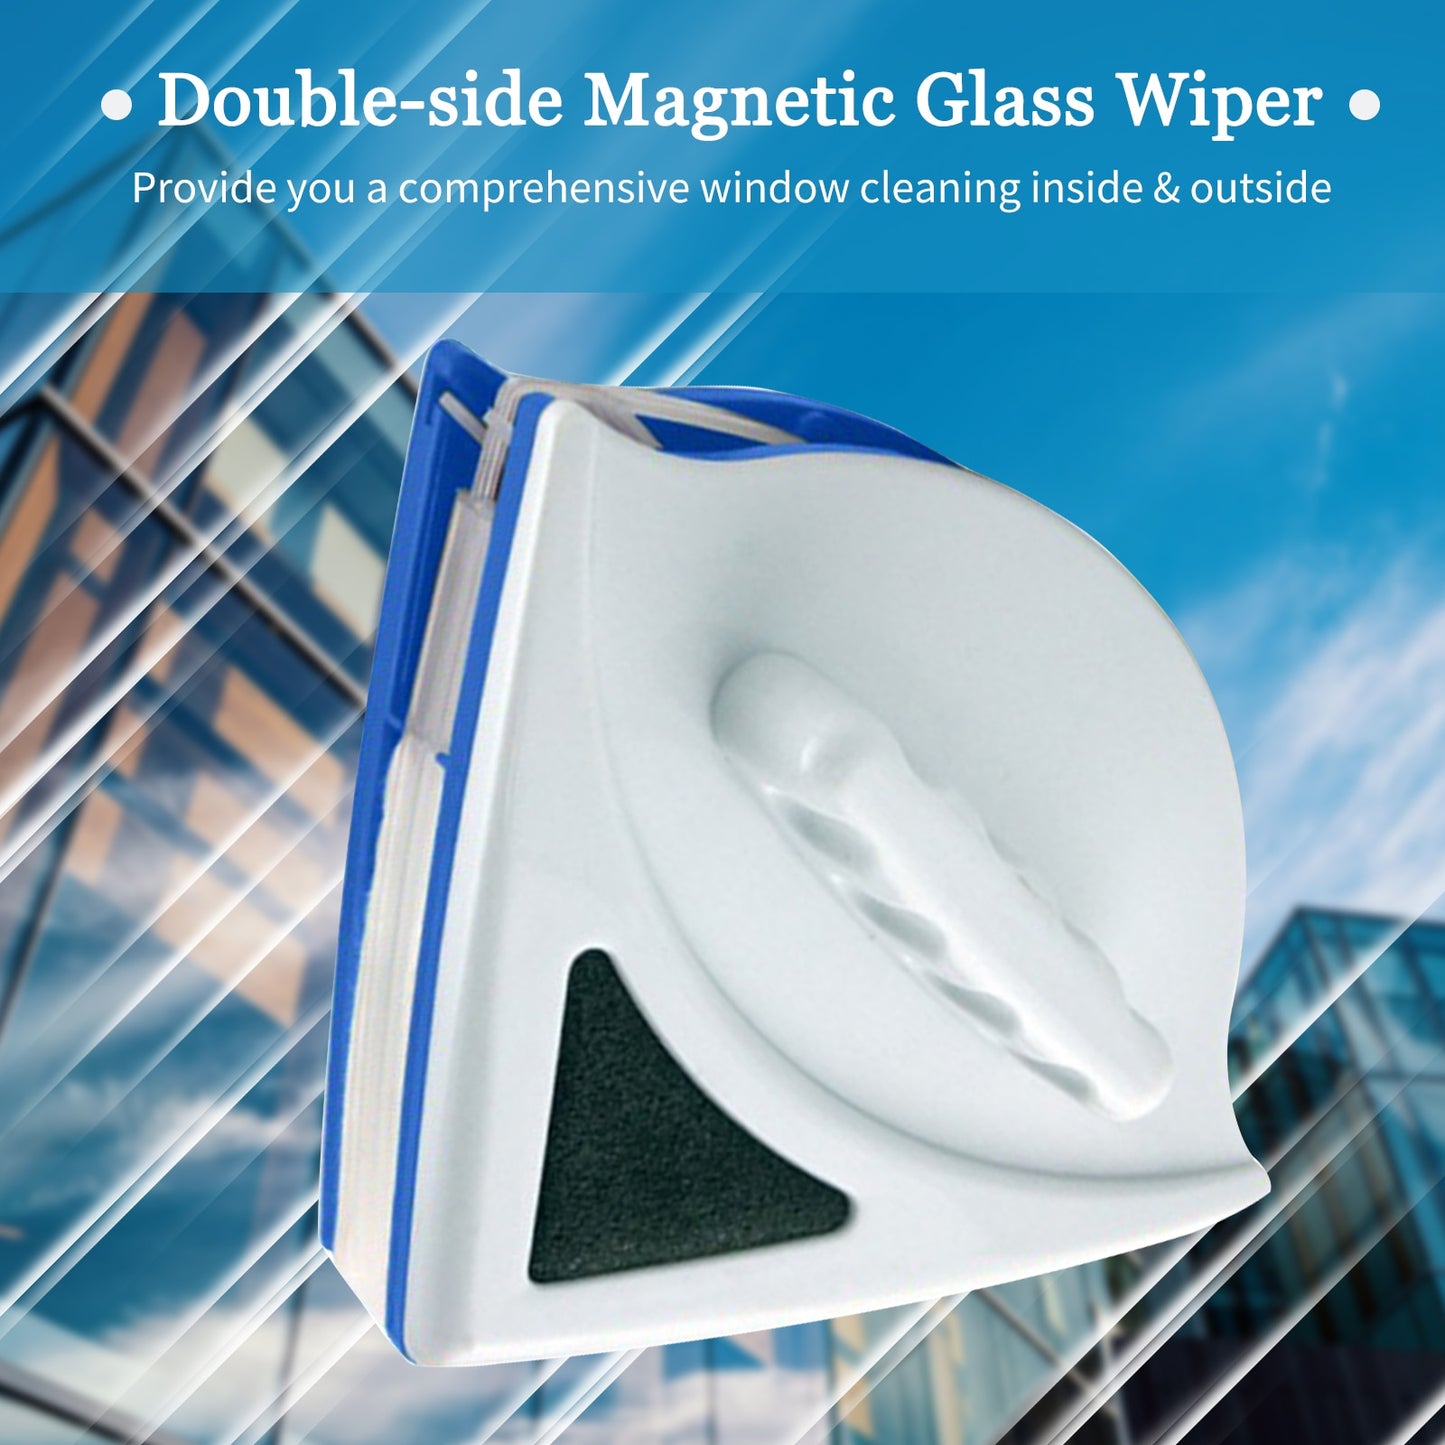 Magnetic Window Cleaner DailyBoho